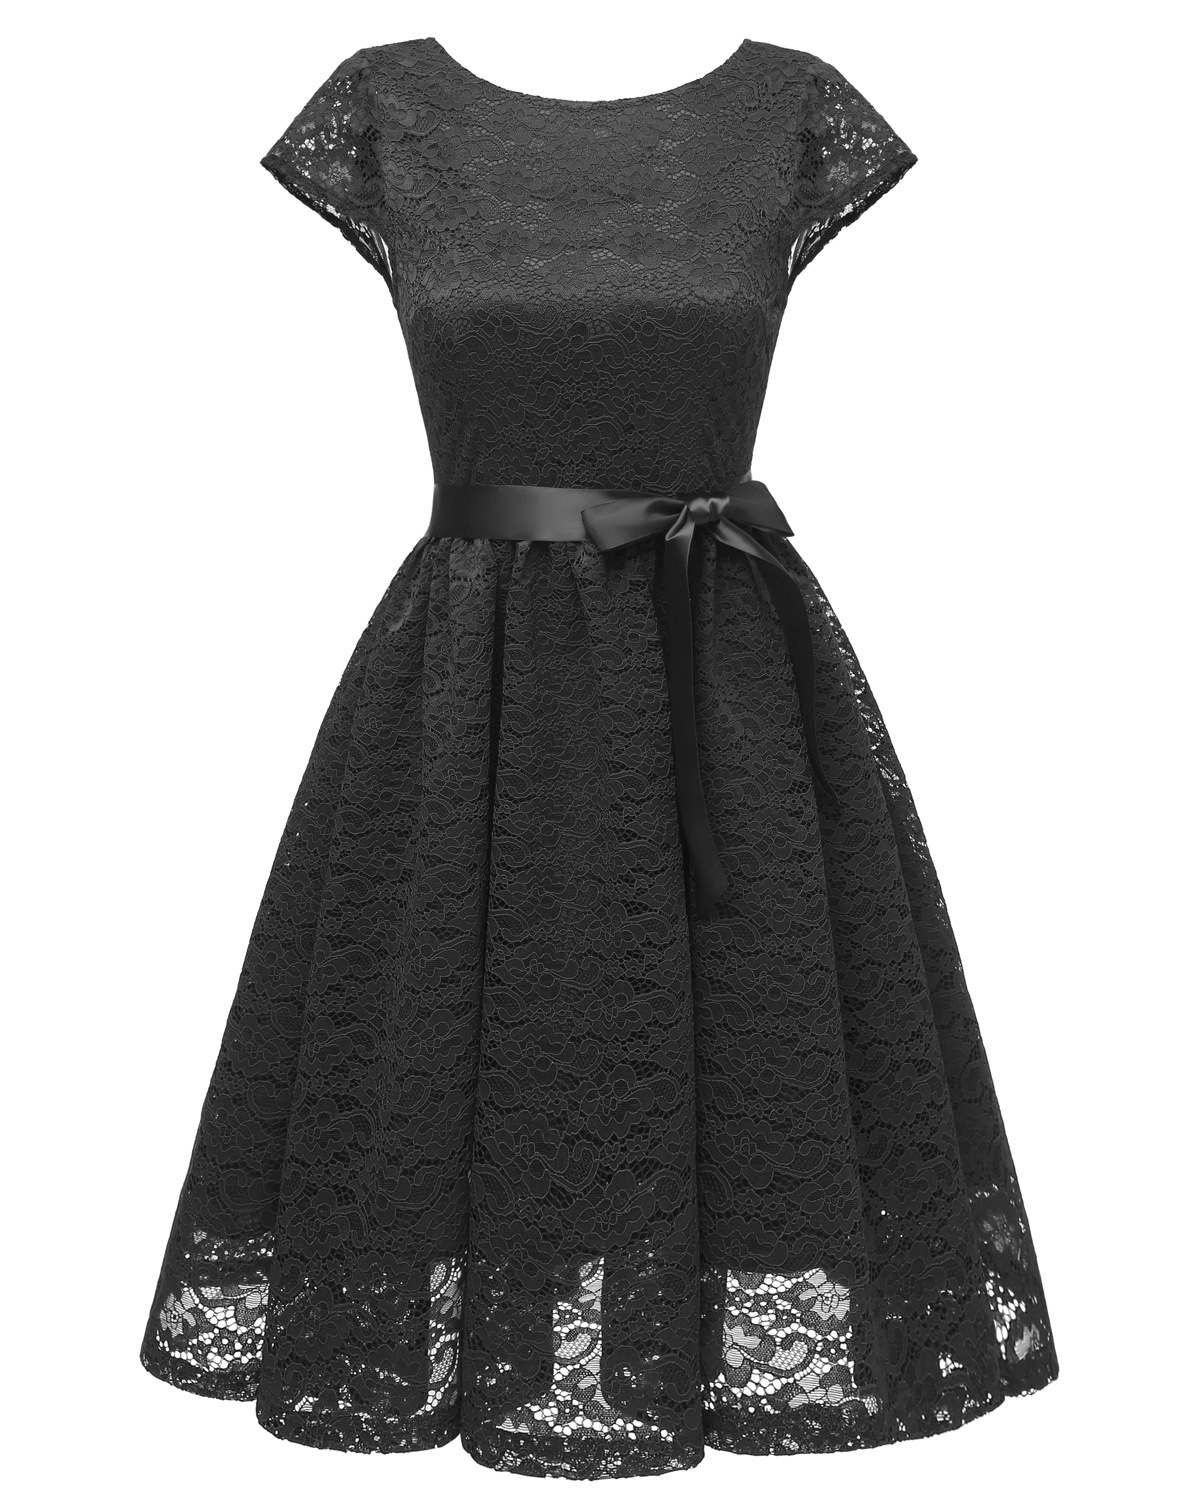 Women Floral Lace Dress O Neck Backless Cap Sleeve Belted A Line Cocktail Party Dress black